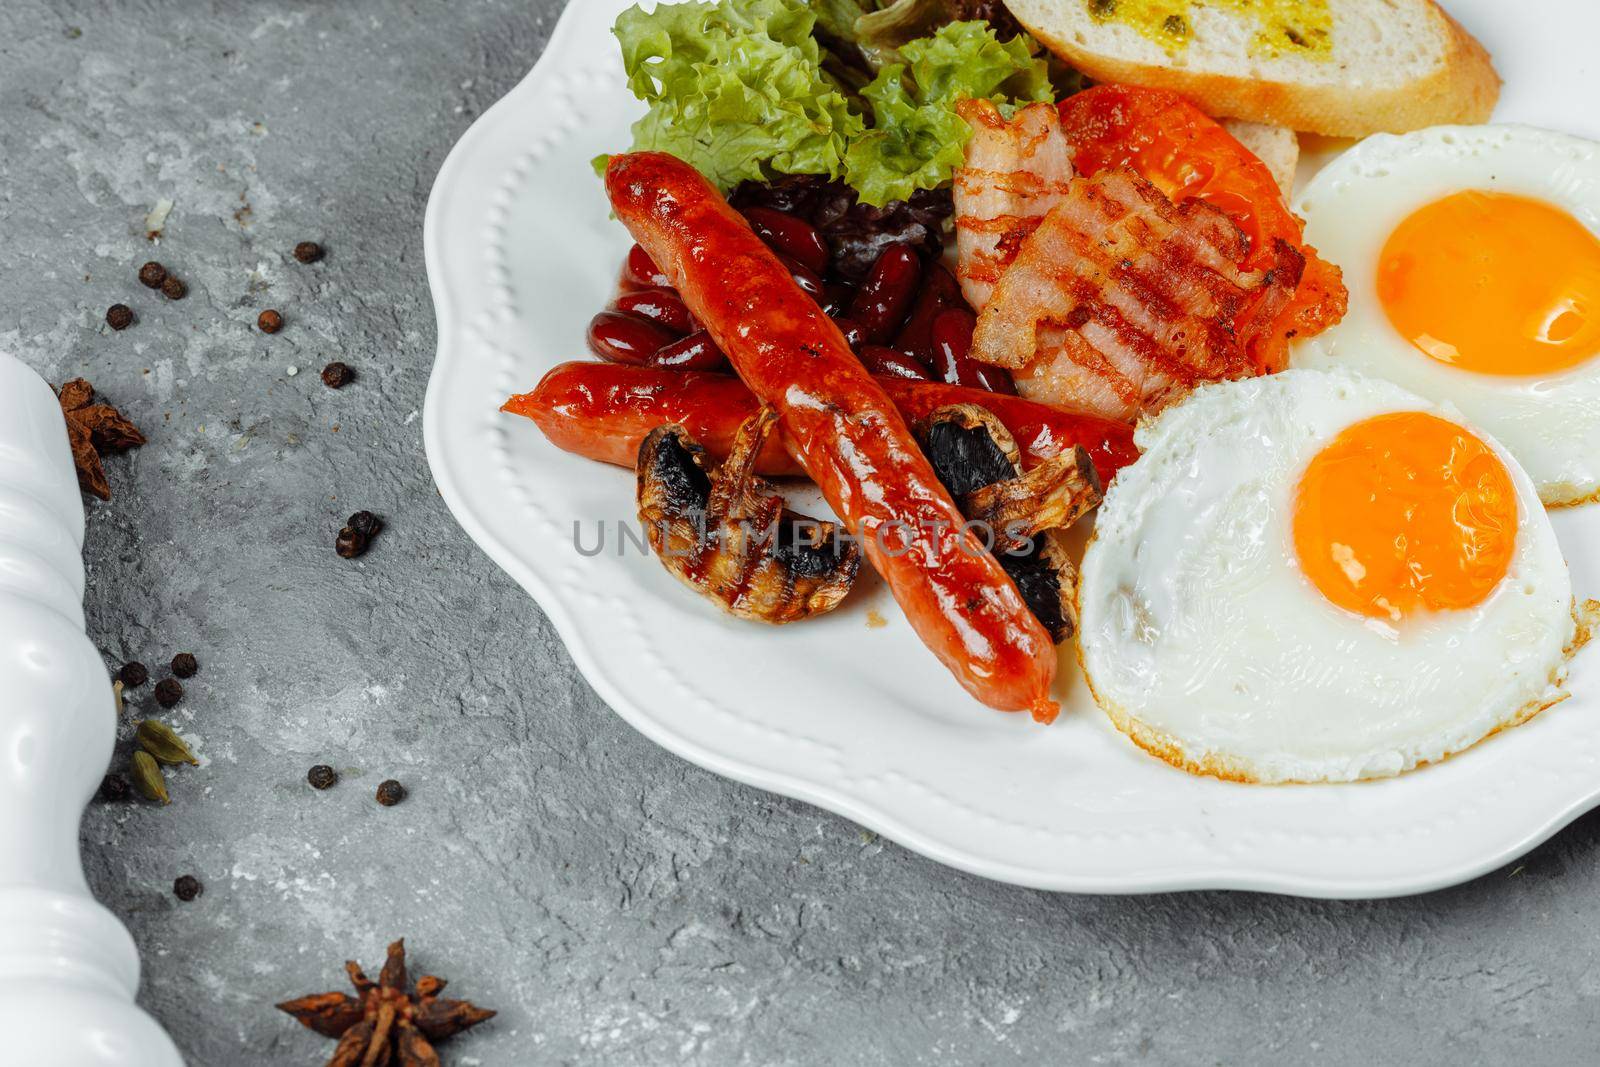 Fried breakfast with bacon, sausages and baked beans by UcheaD